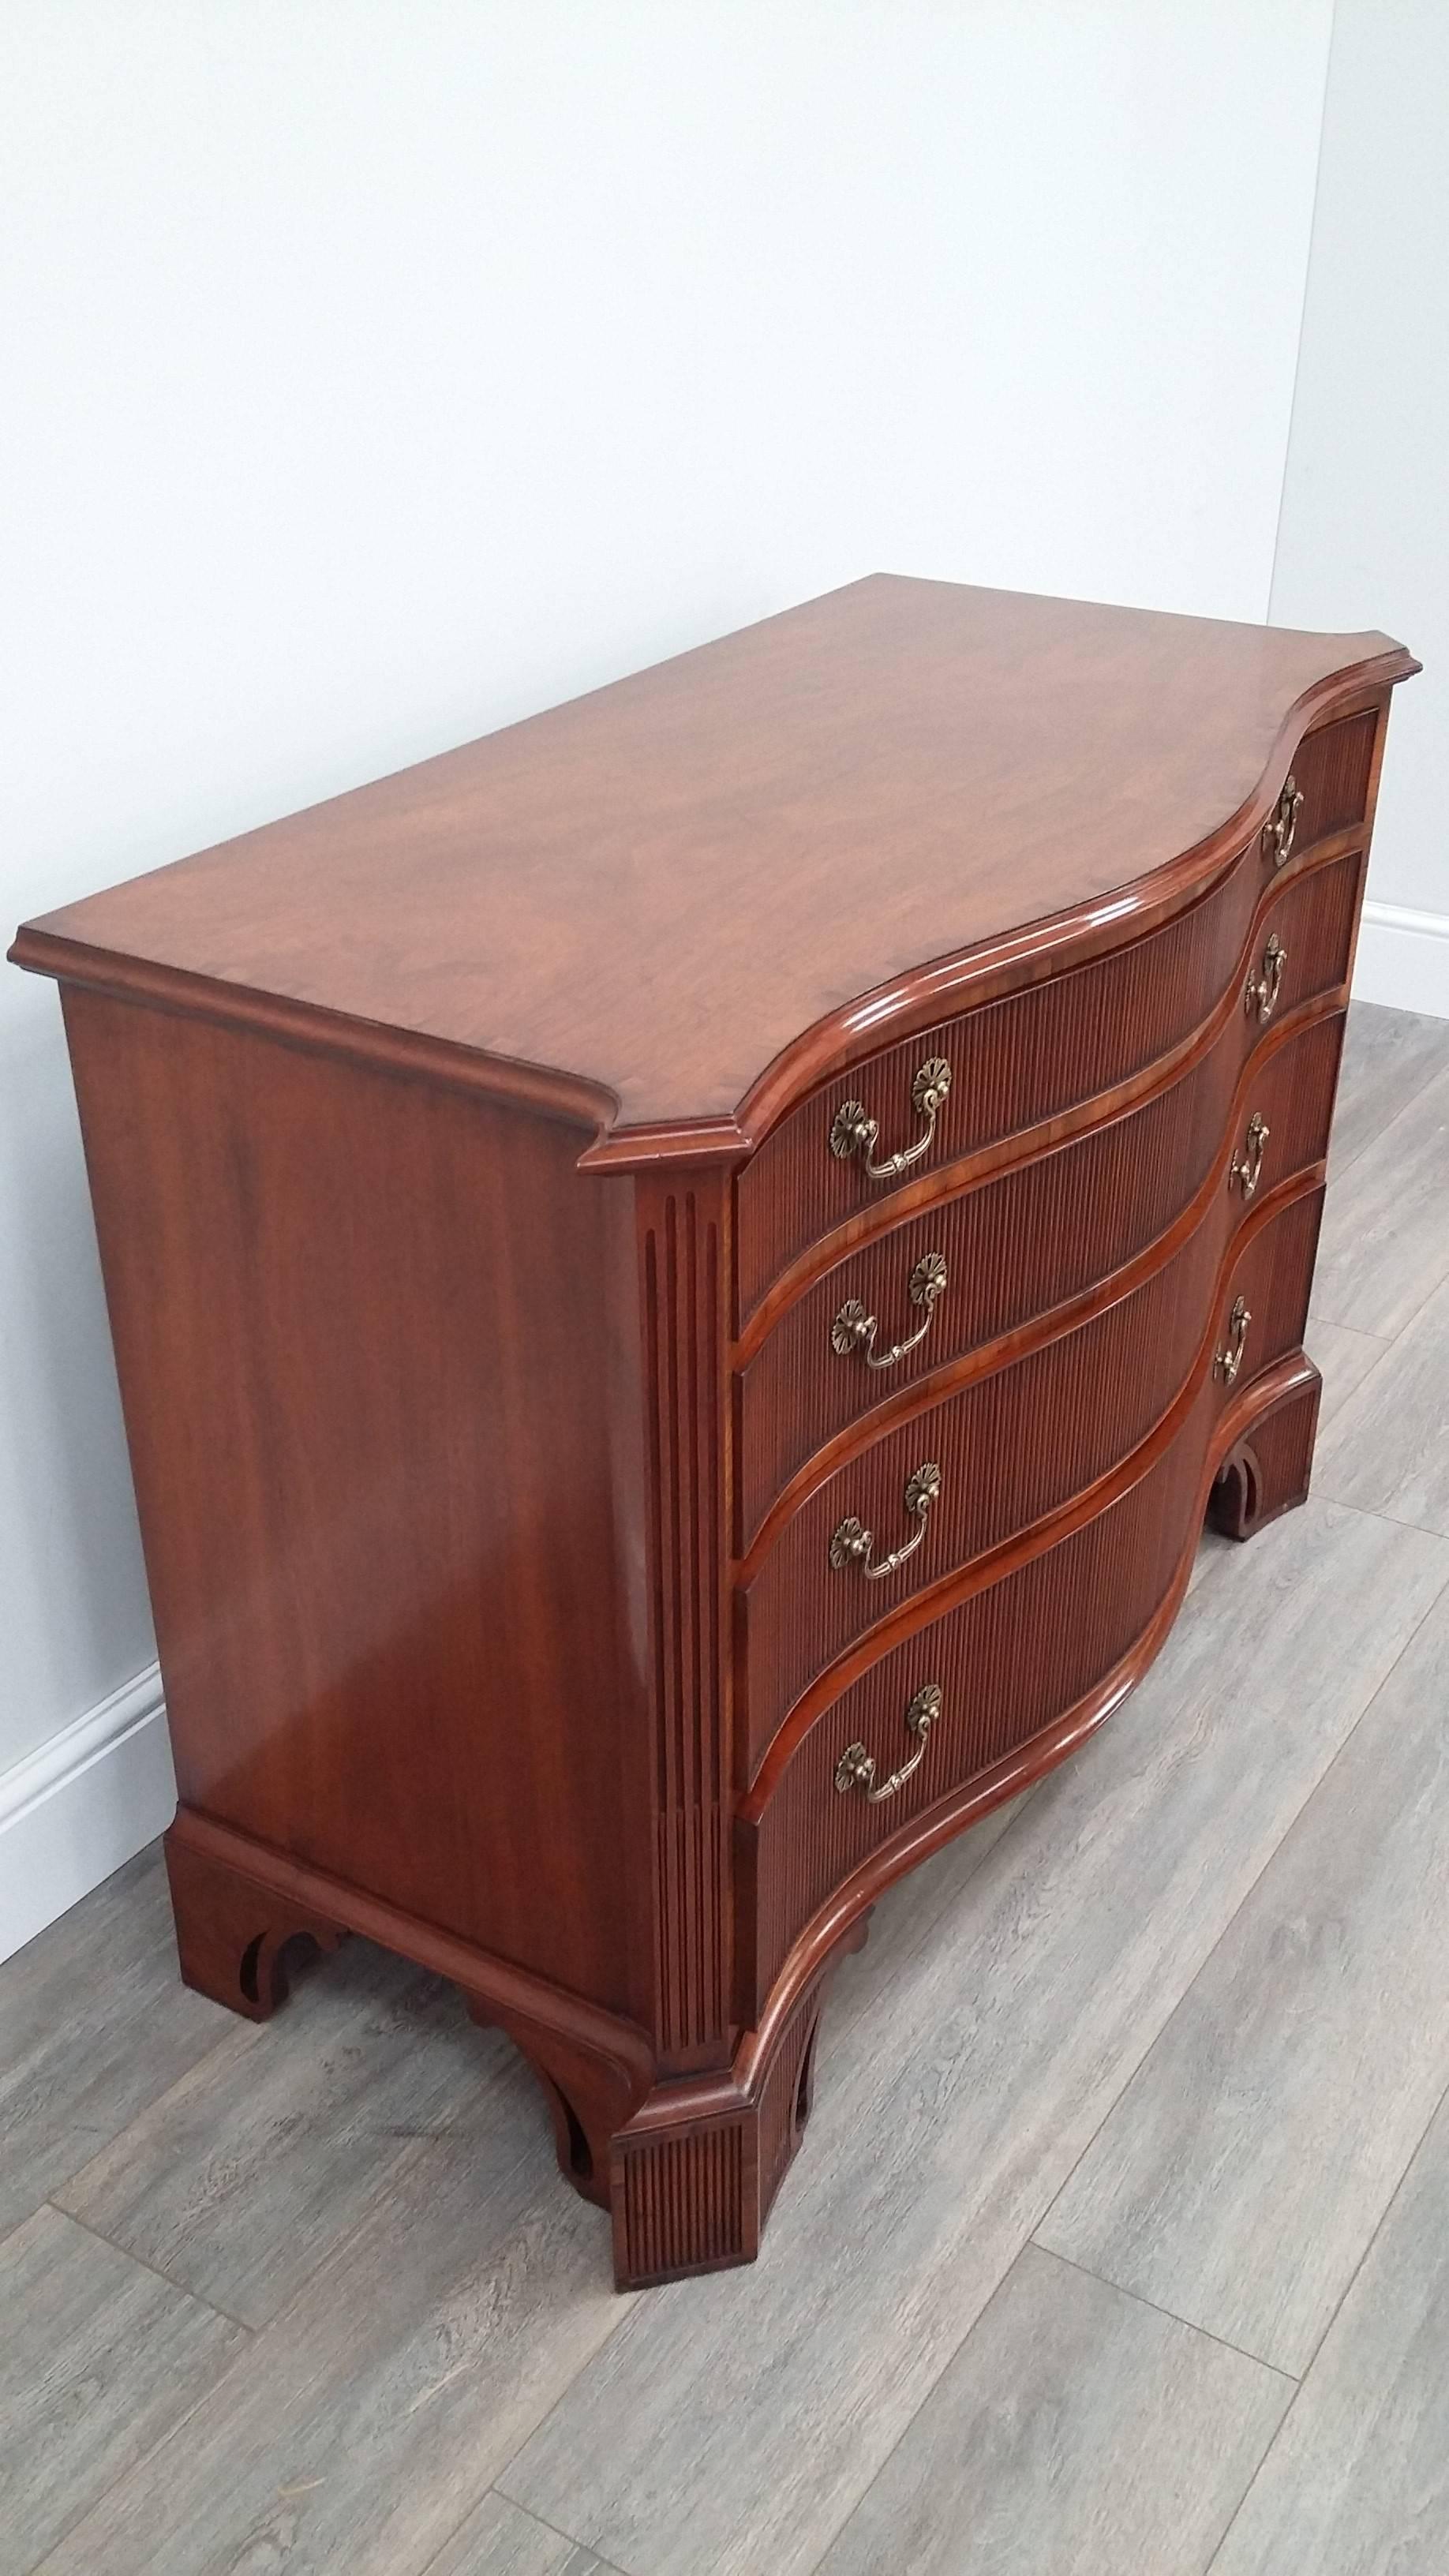 An impressive mahogany serpentine fronted chest of drawers in Chippendale style with a cross banded top and canted and fluted corners.  Reeded mouldings cover the four drawer fronts and the pierced carved feet.  With brass bail pull handles on